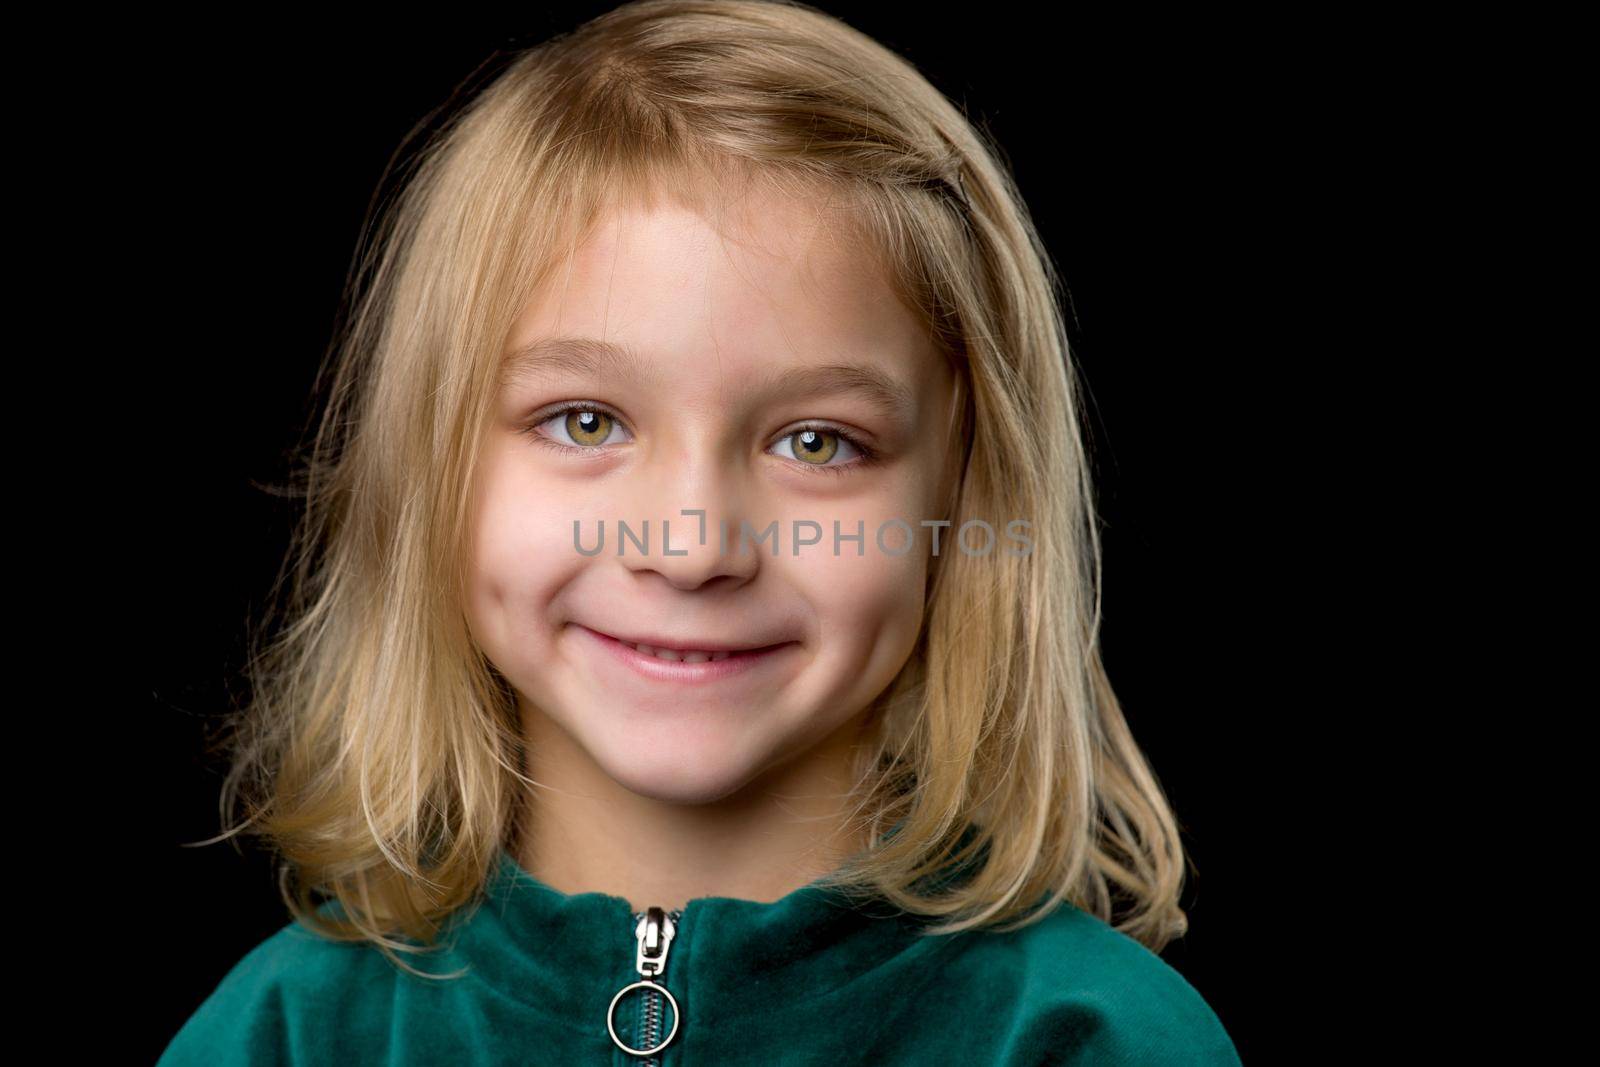 Close up view of a cute smiling girl, charming baby, wearing stylish clothes, posing in studio, portrait of a lovely happy girl, isolated on black background